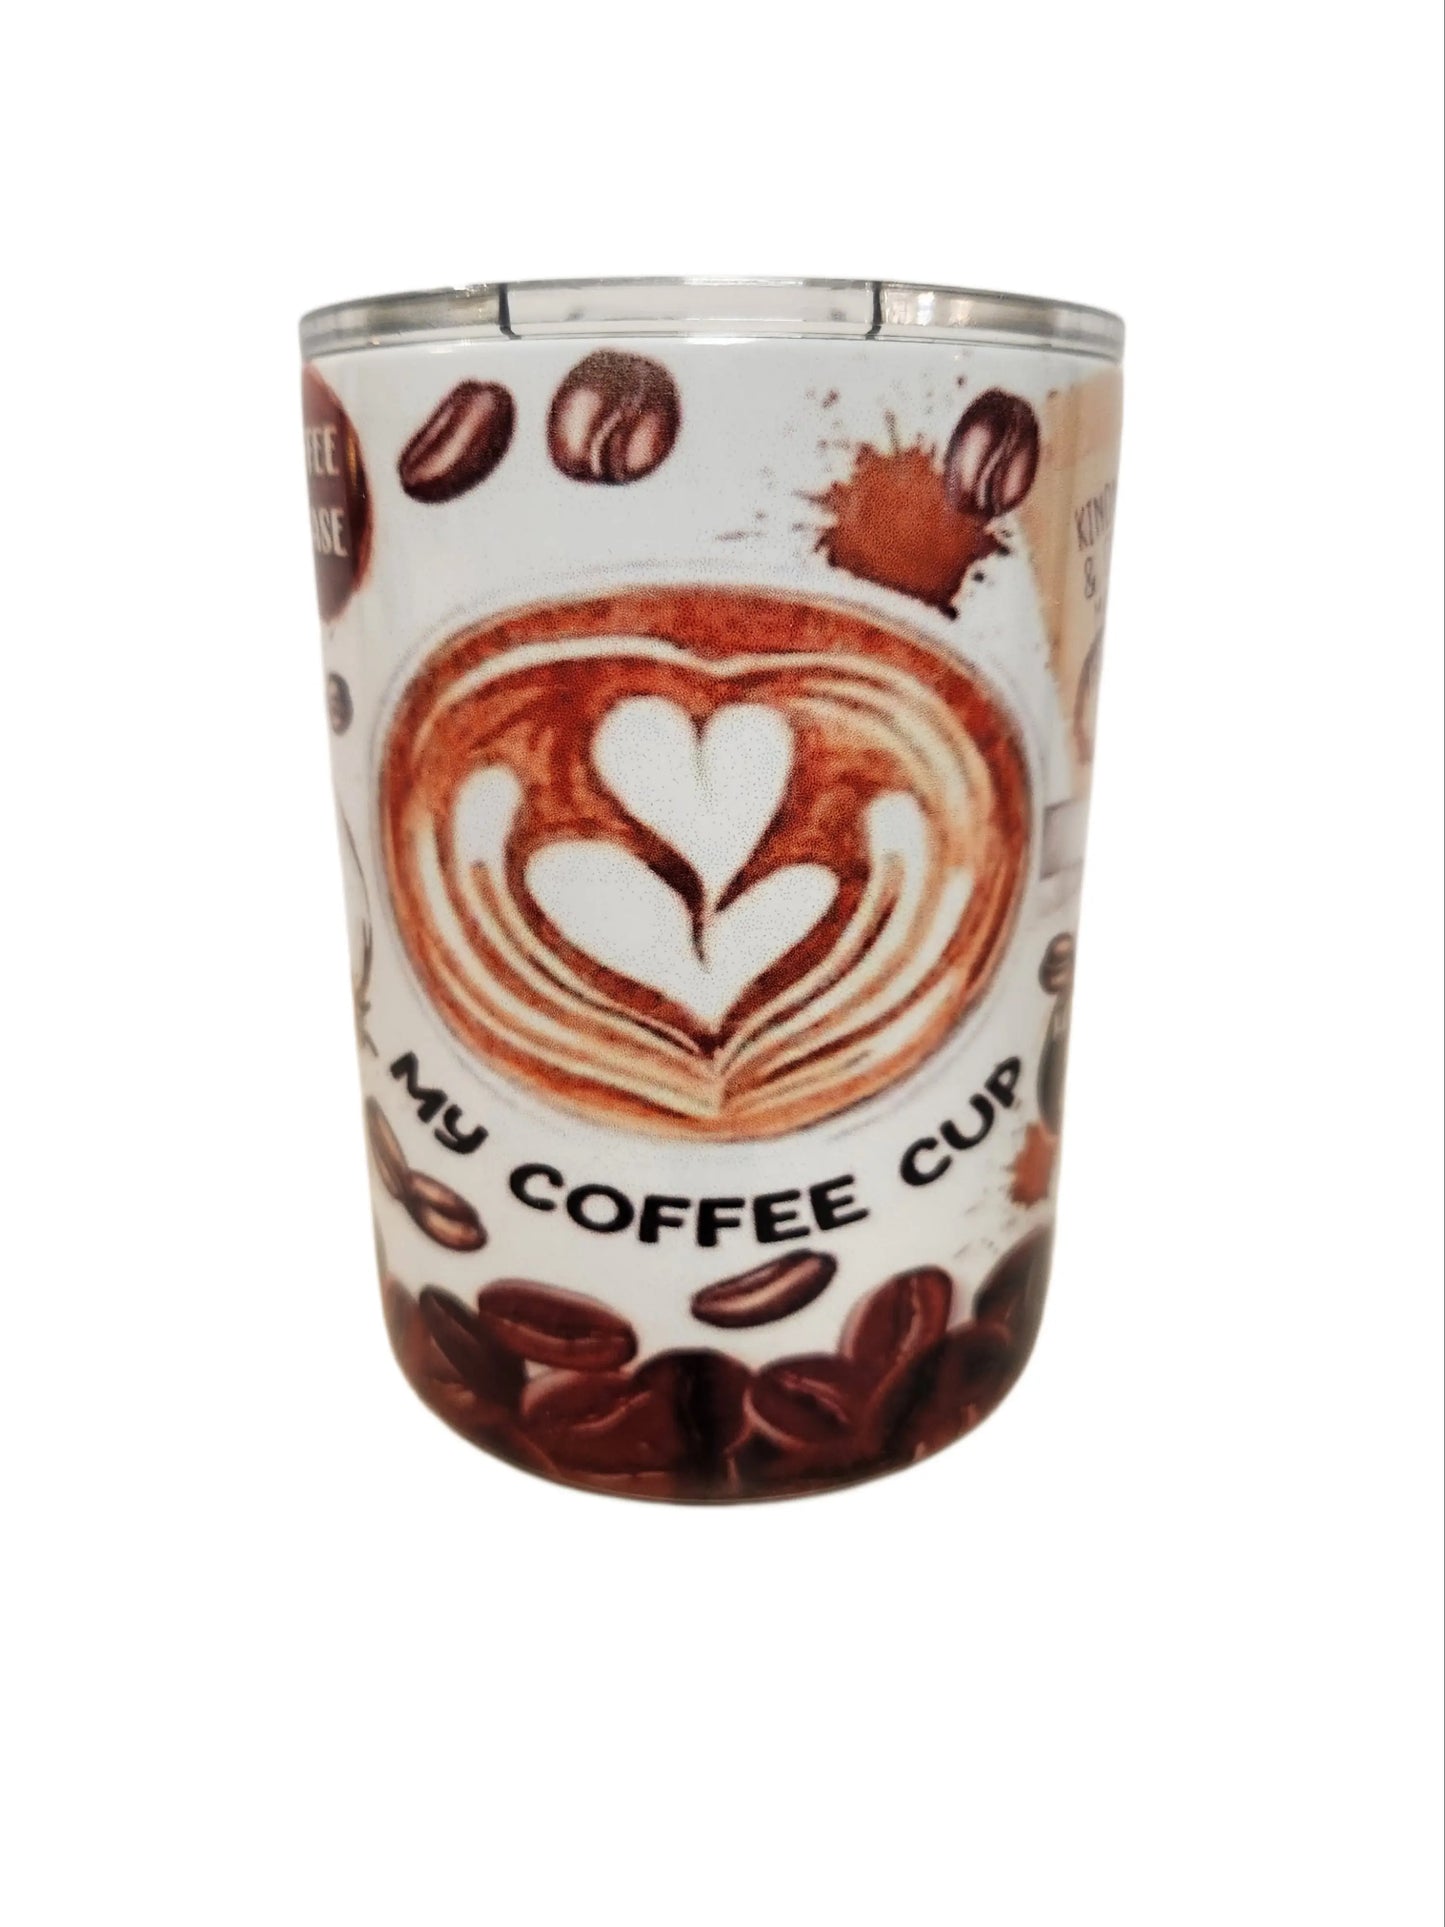 Today, I will drink coffee and smile 10oz coffee tumblers - Image #4